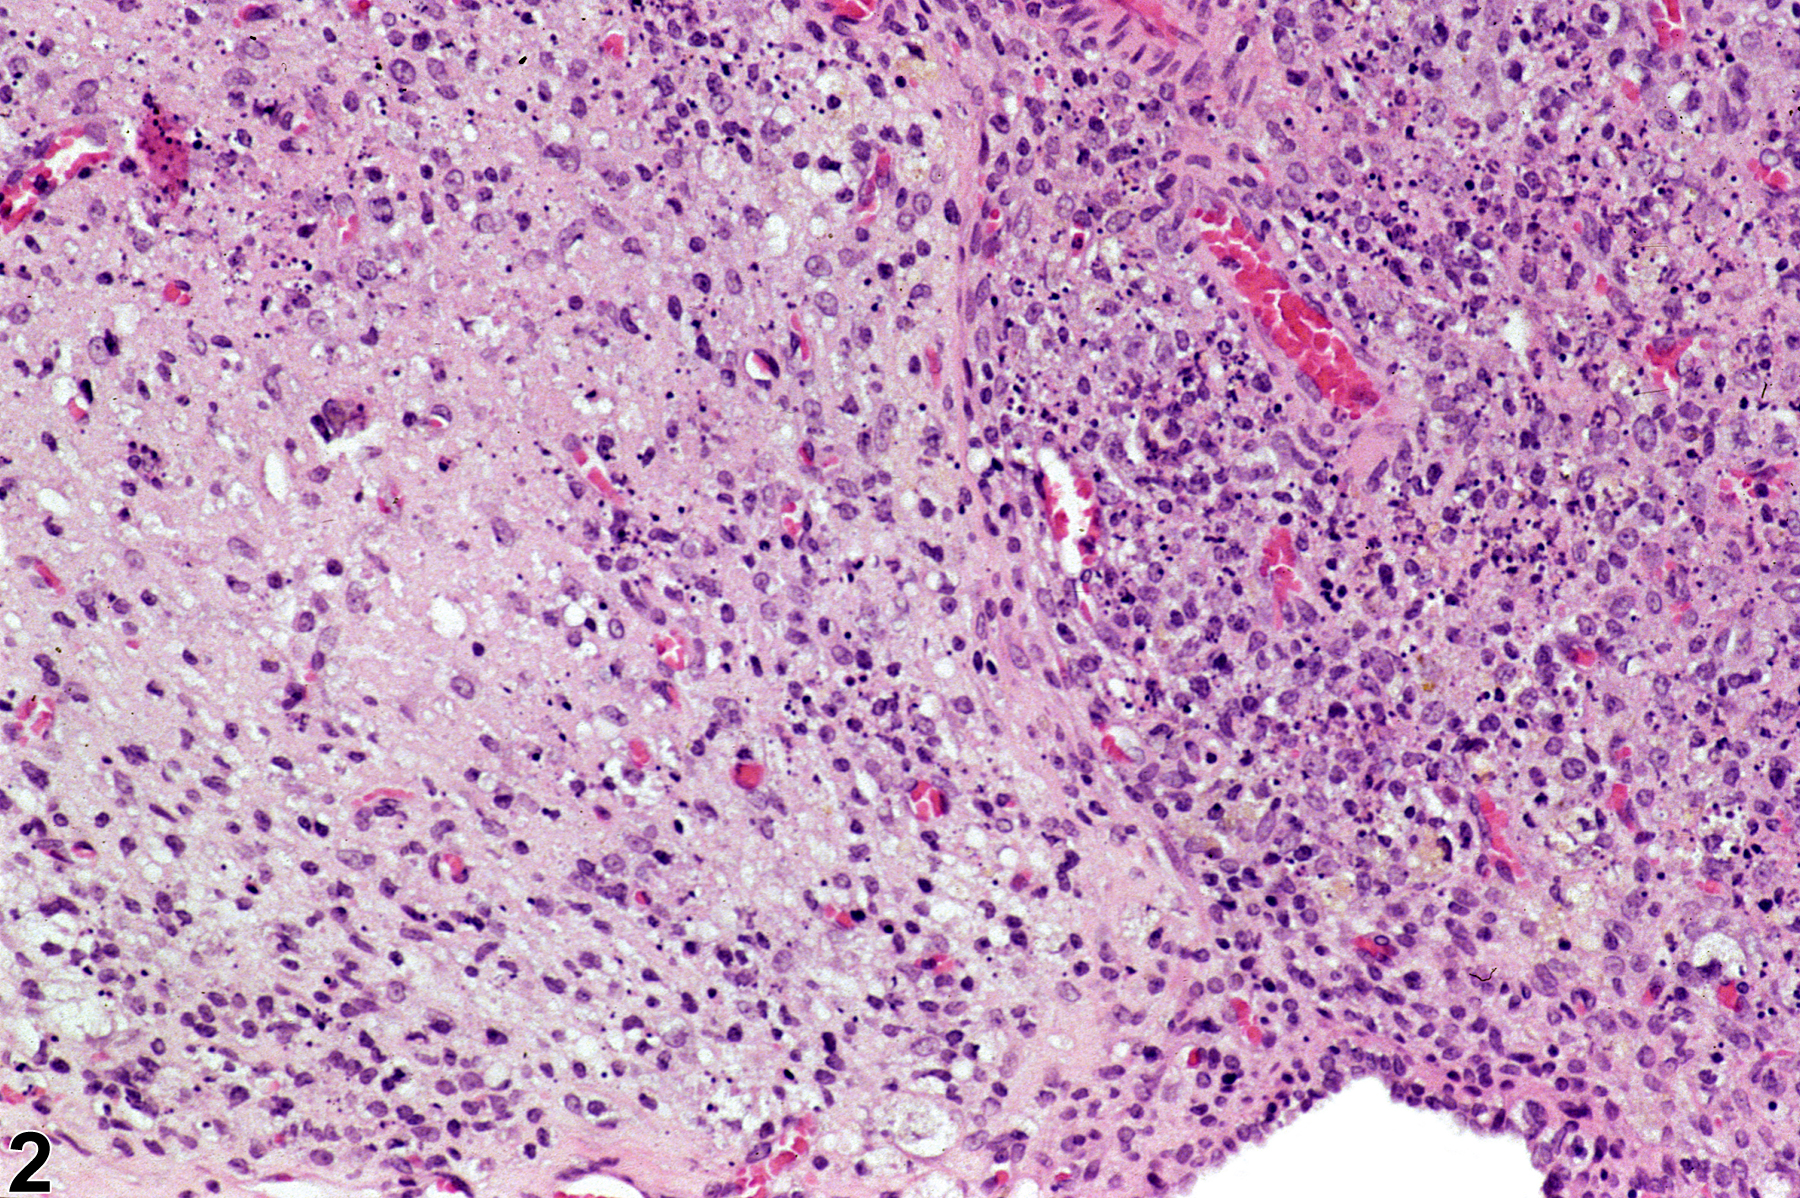 Image of necrosis in the ovary from a female F344/N rat in a chronic study